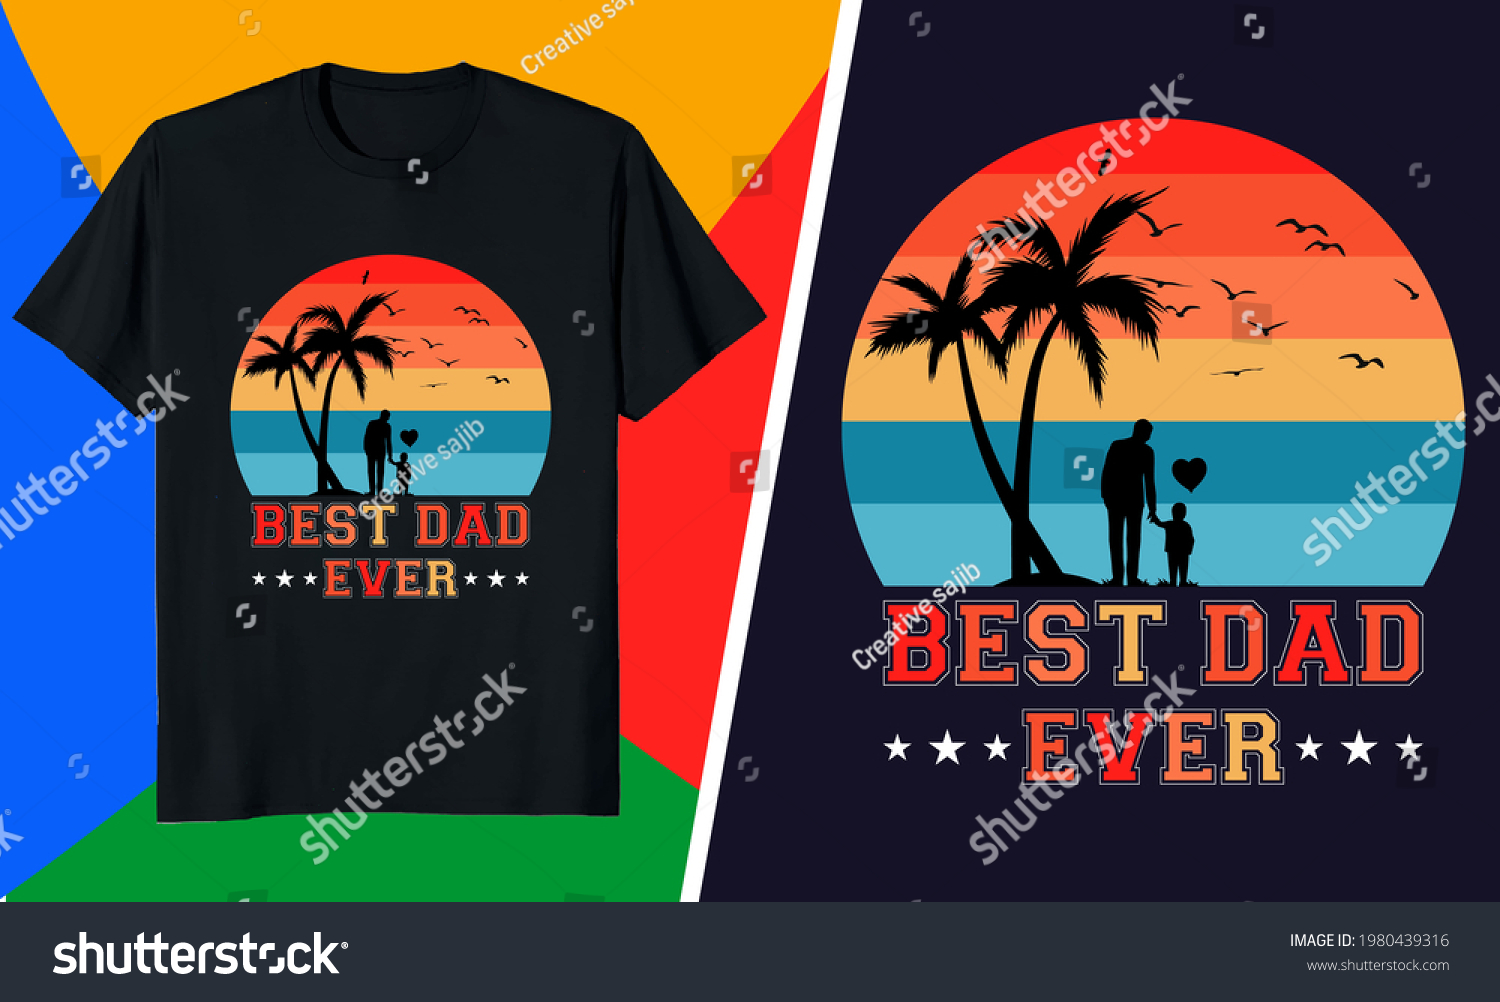 SVG of Father day t shirt design- best dad ever - _ World's #1 Father , Best father, dad, son, daughters, daddy,  t-shirt design, father day.  svg